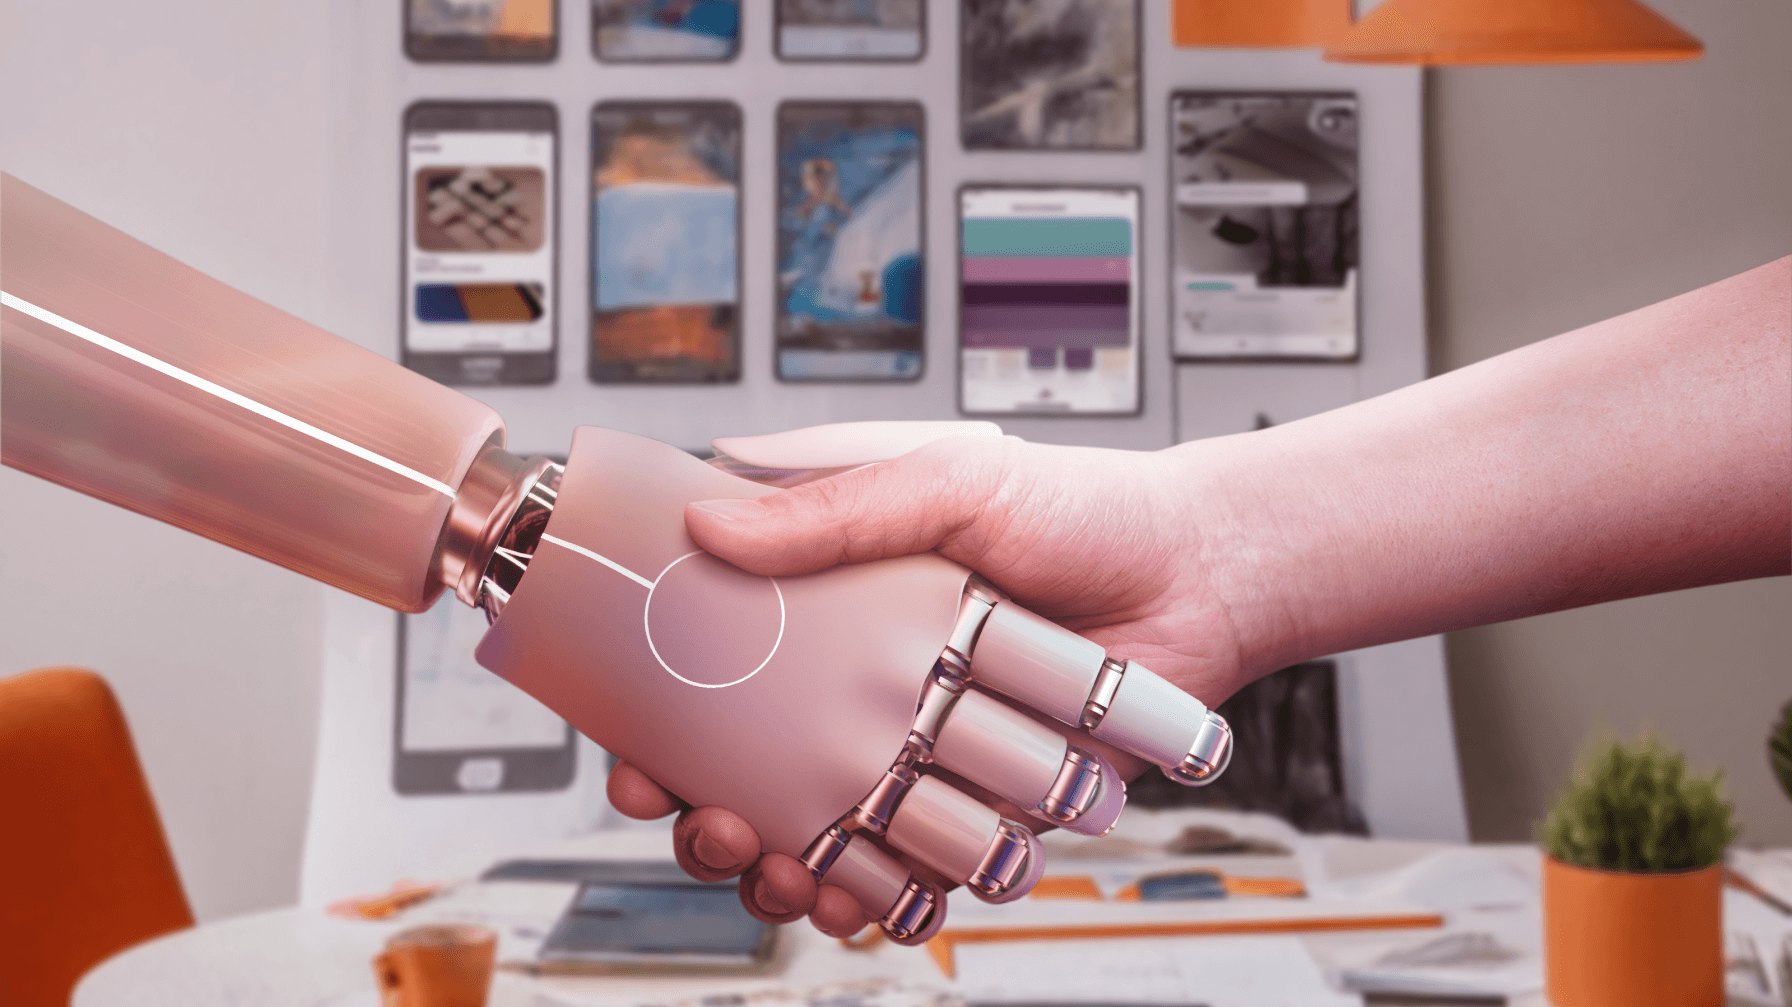 the hero image for a blog post about creating a mood board using AI shows a robot and human shaking hands with an app design in the background.